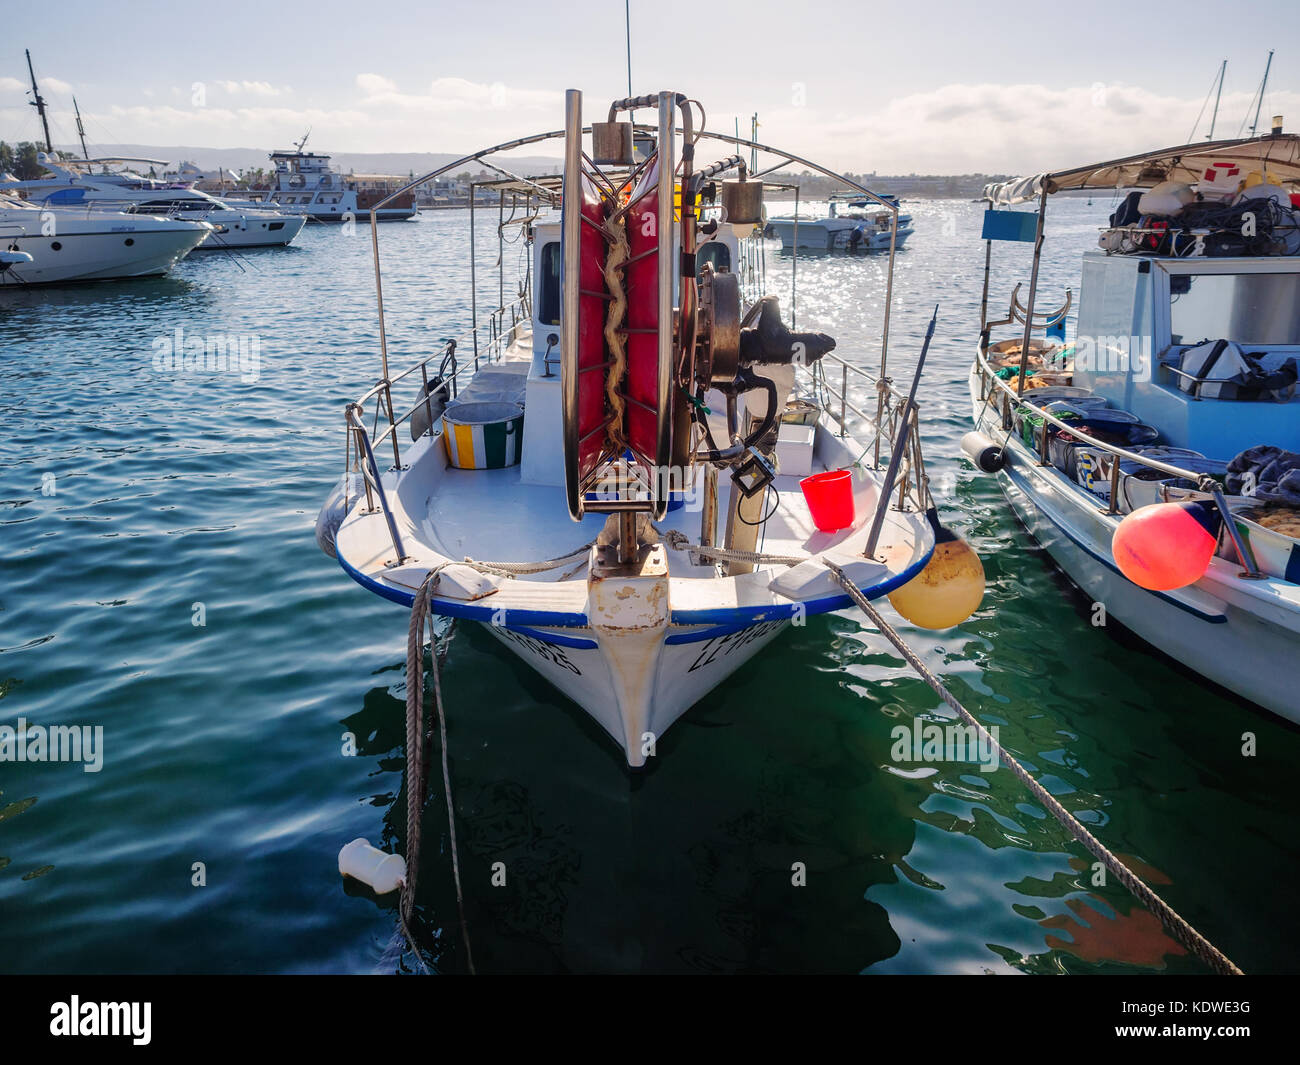 Paphos (Pafos), Cyprus - July 19, 2016: Traditional fishing boat moored in a harbour Stock Photo